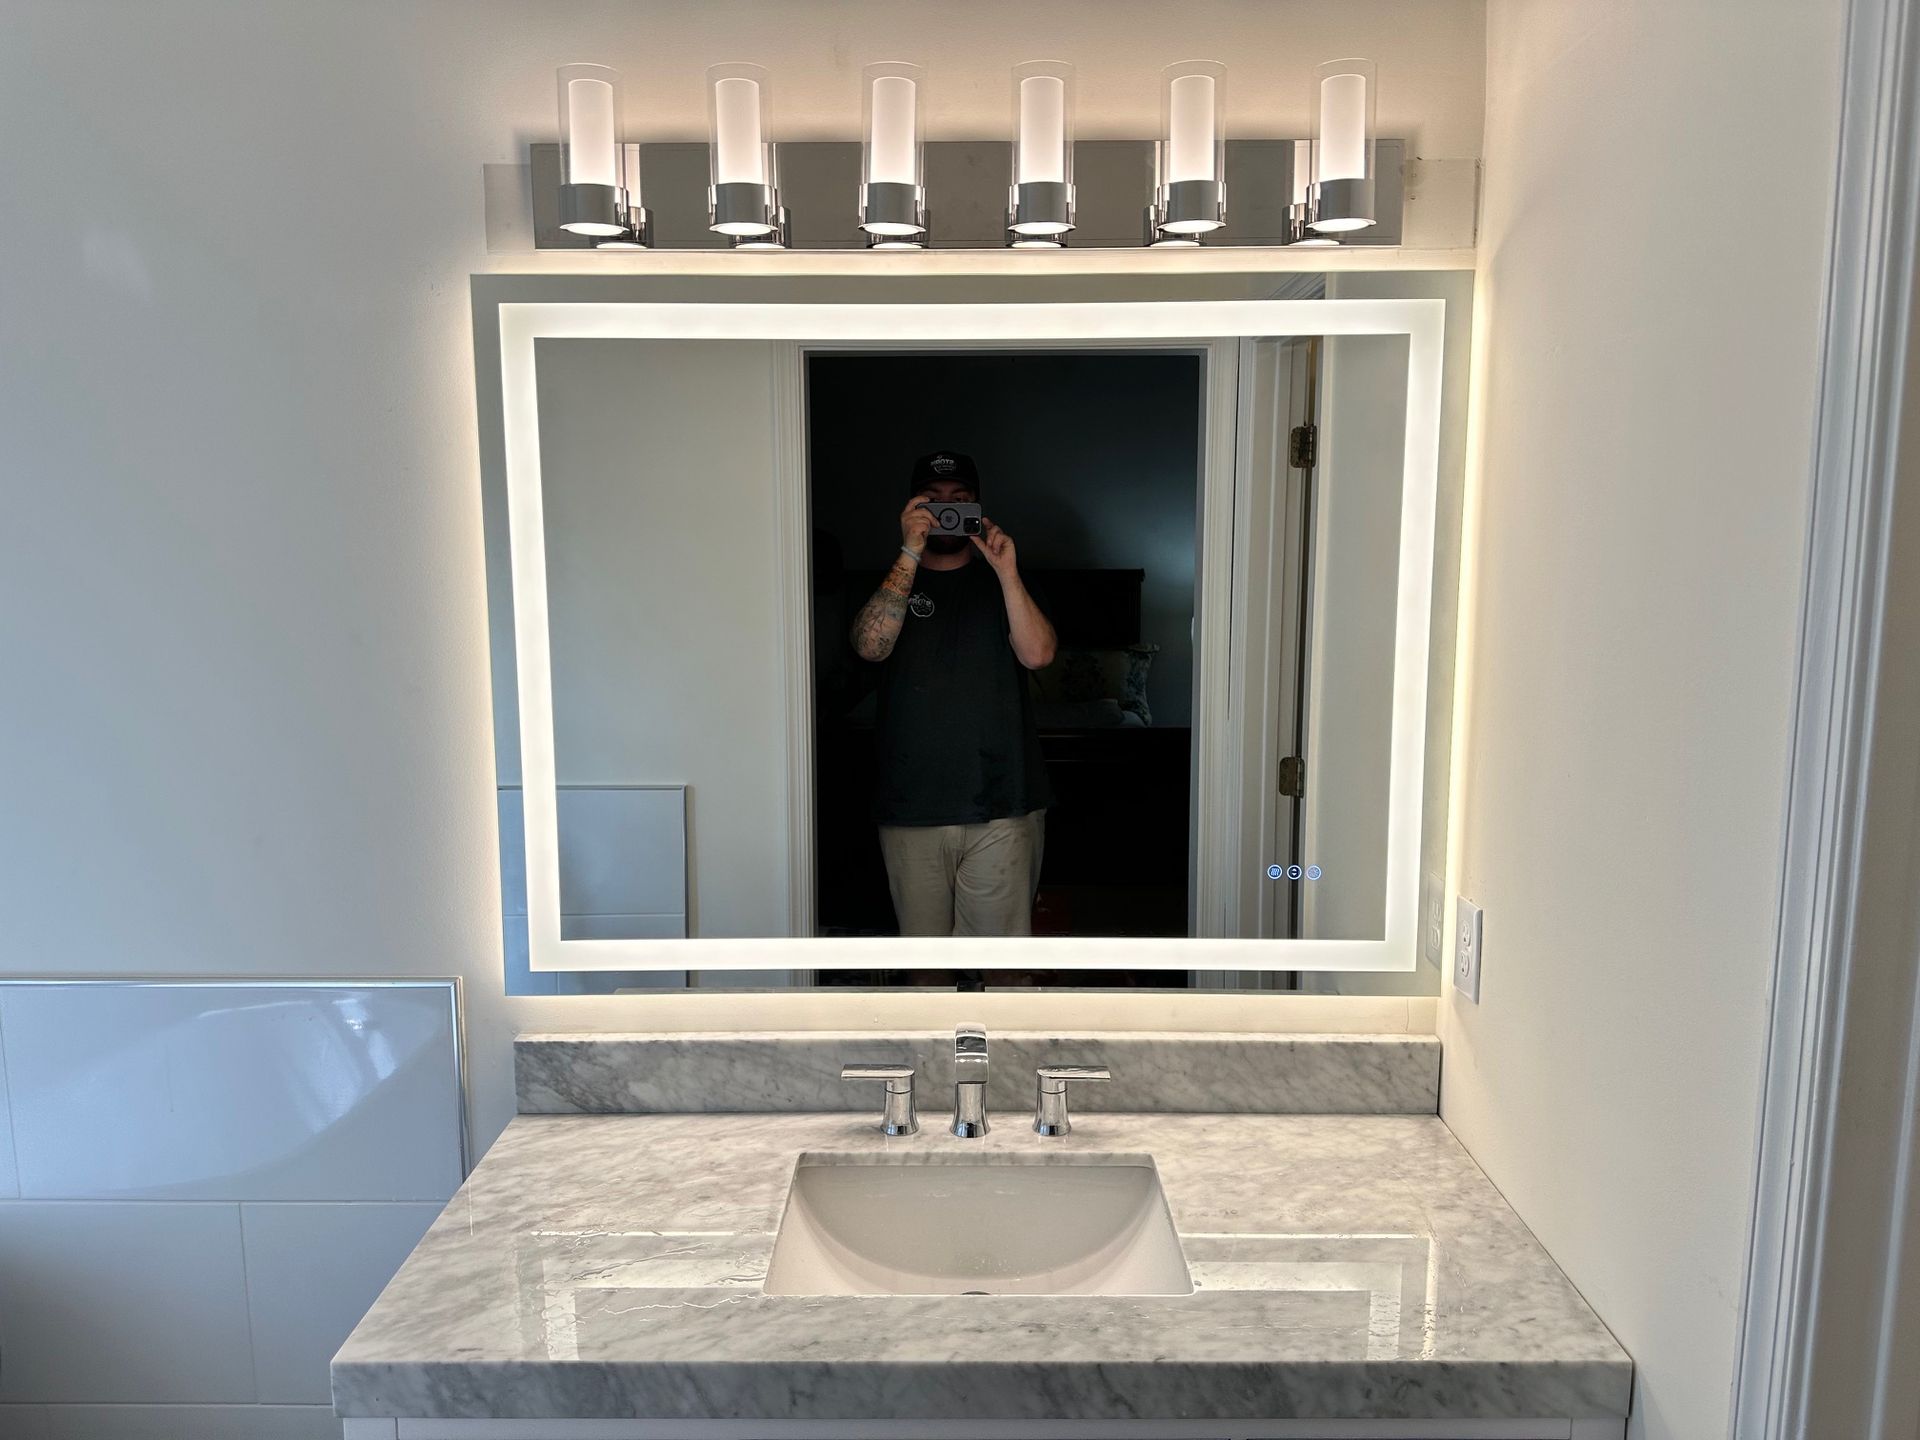 A man is taking a picture of himself in a bathroom mirror.